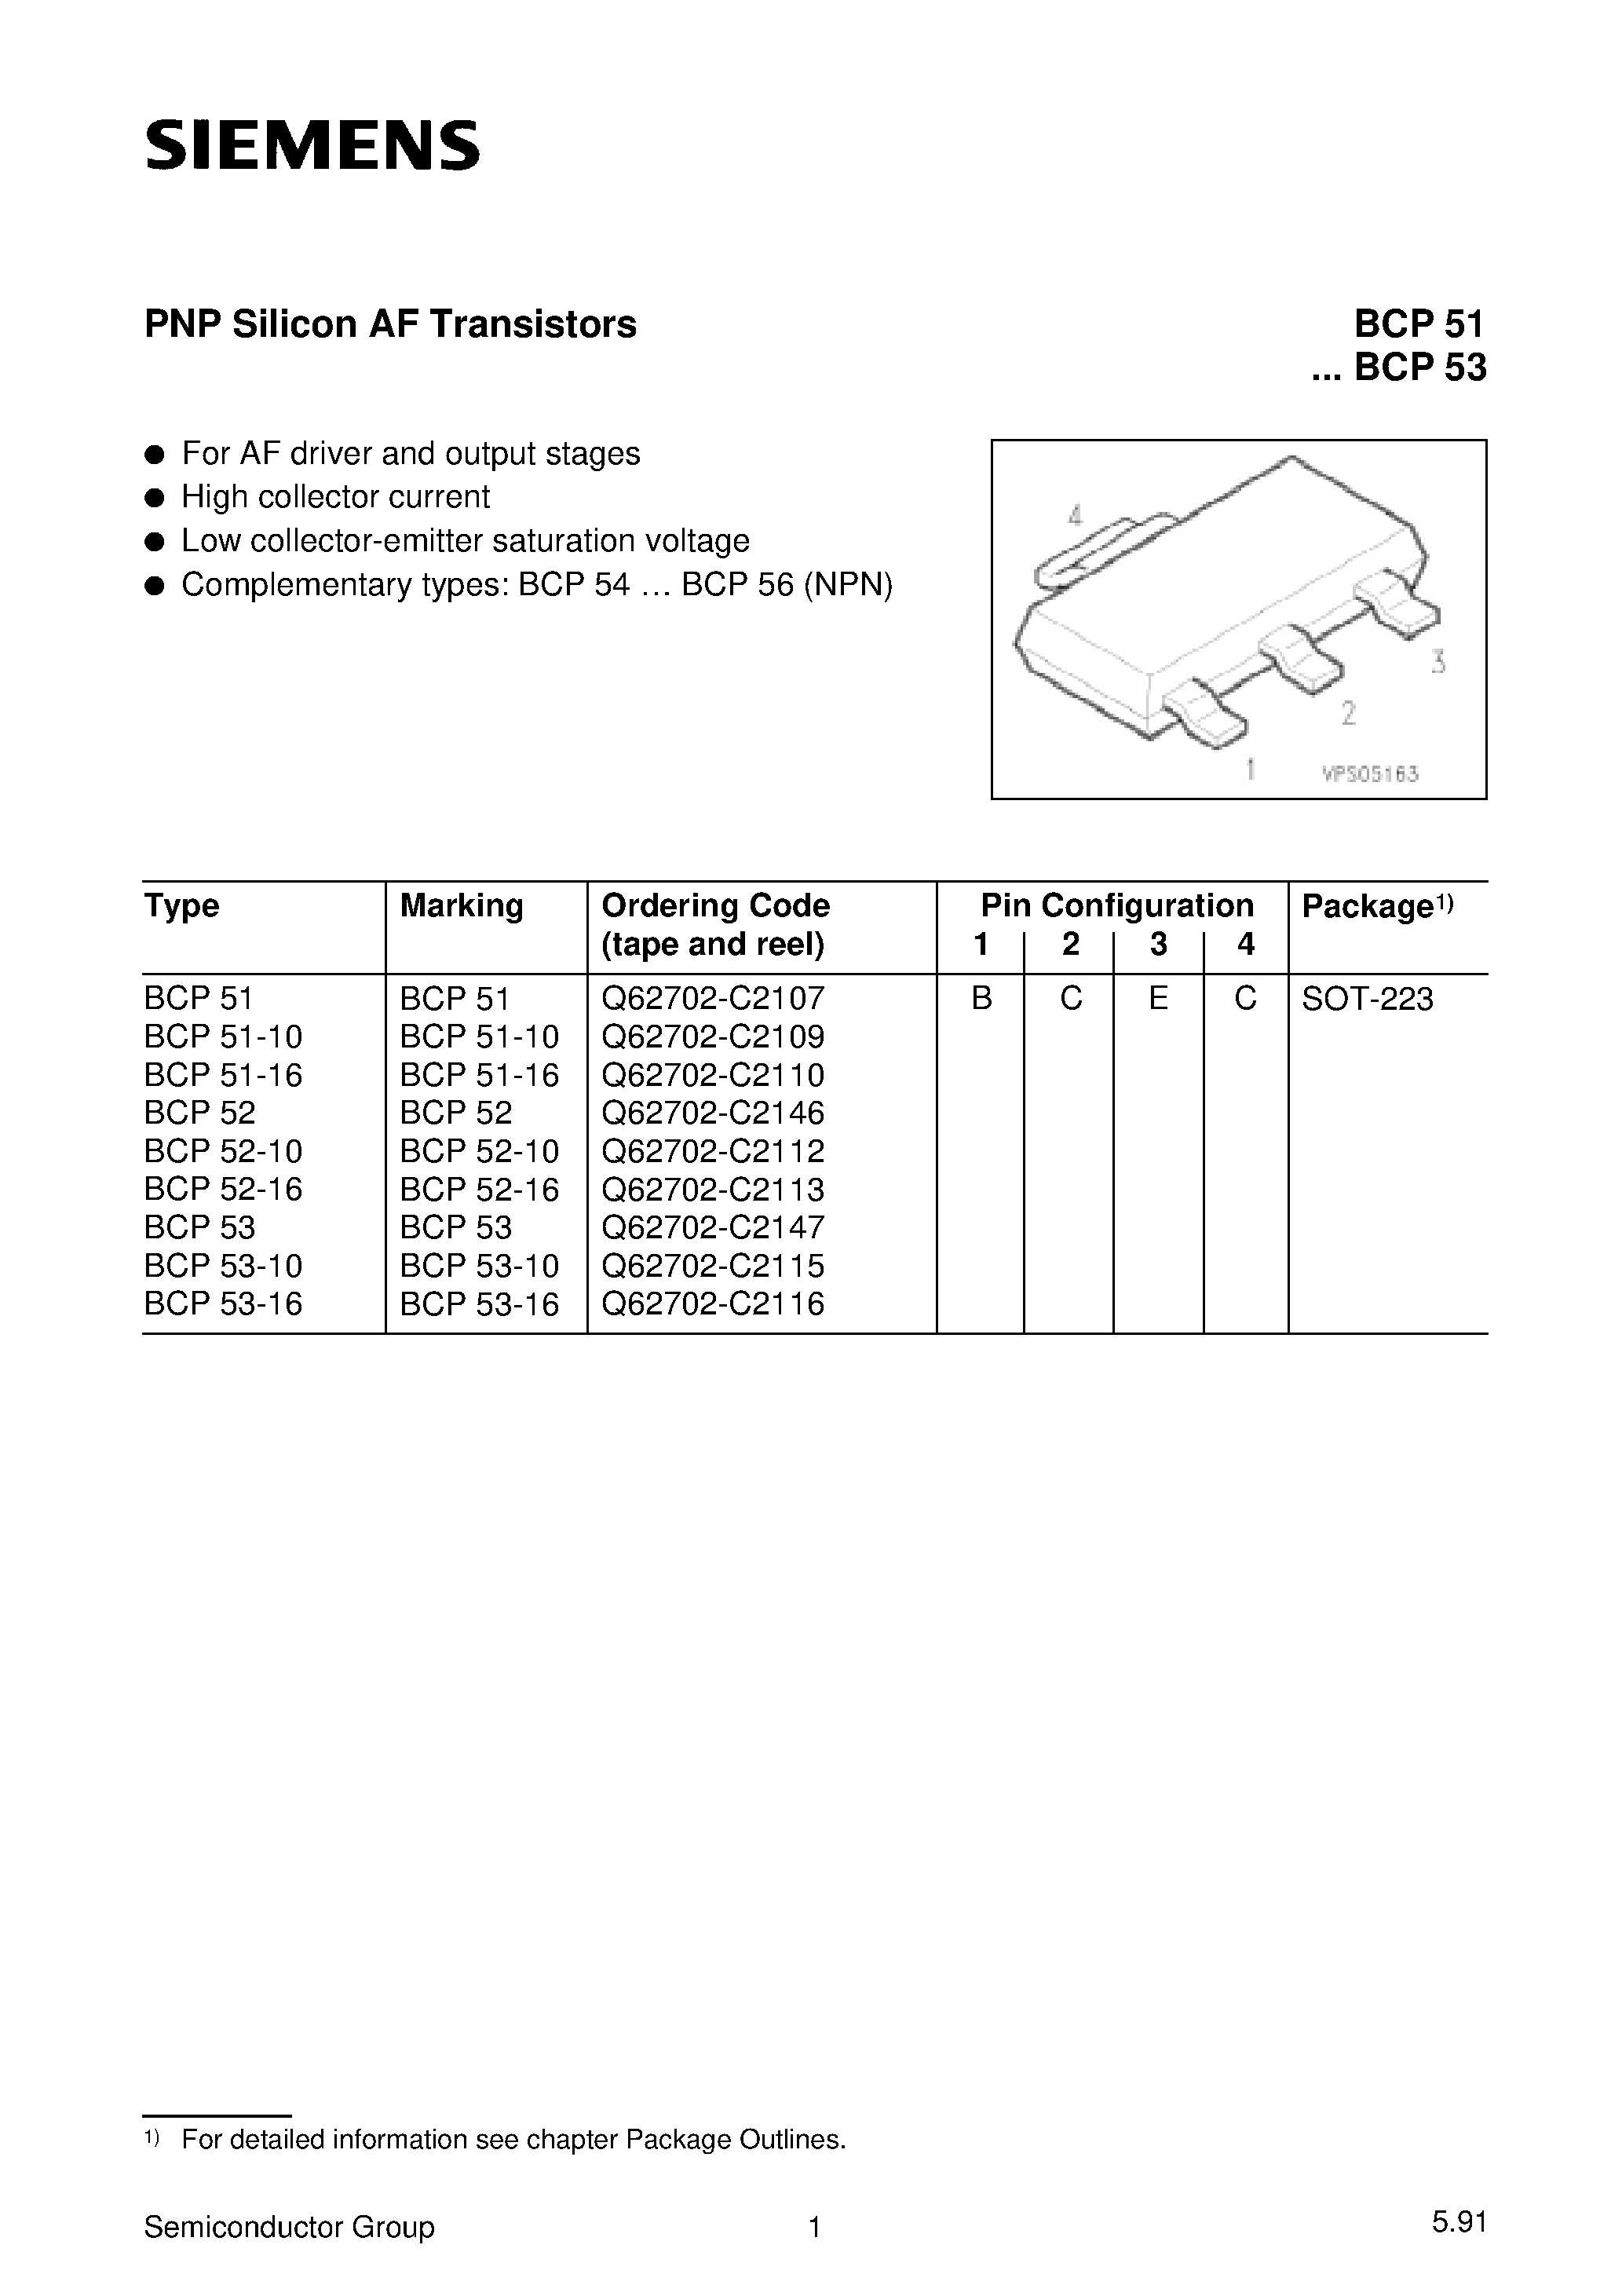 Datasheet BCP53-10 - PNP Silicon AF Transistors (For AF driver and output stages High collector current) page 1